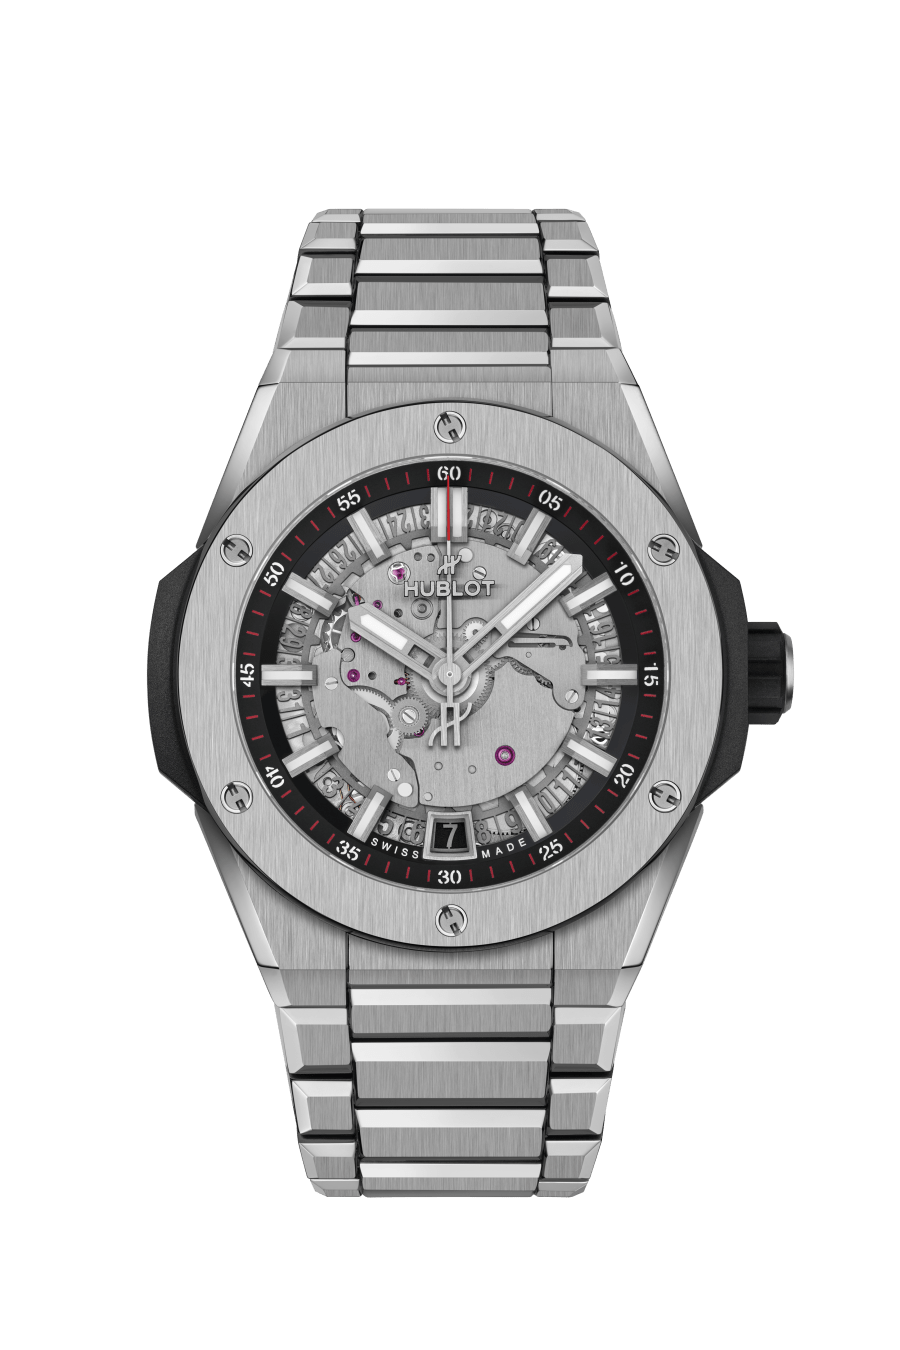 Hublot Big Bang Integrated Time Only in Titanium 42mm